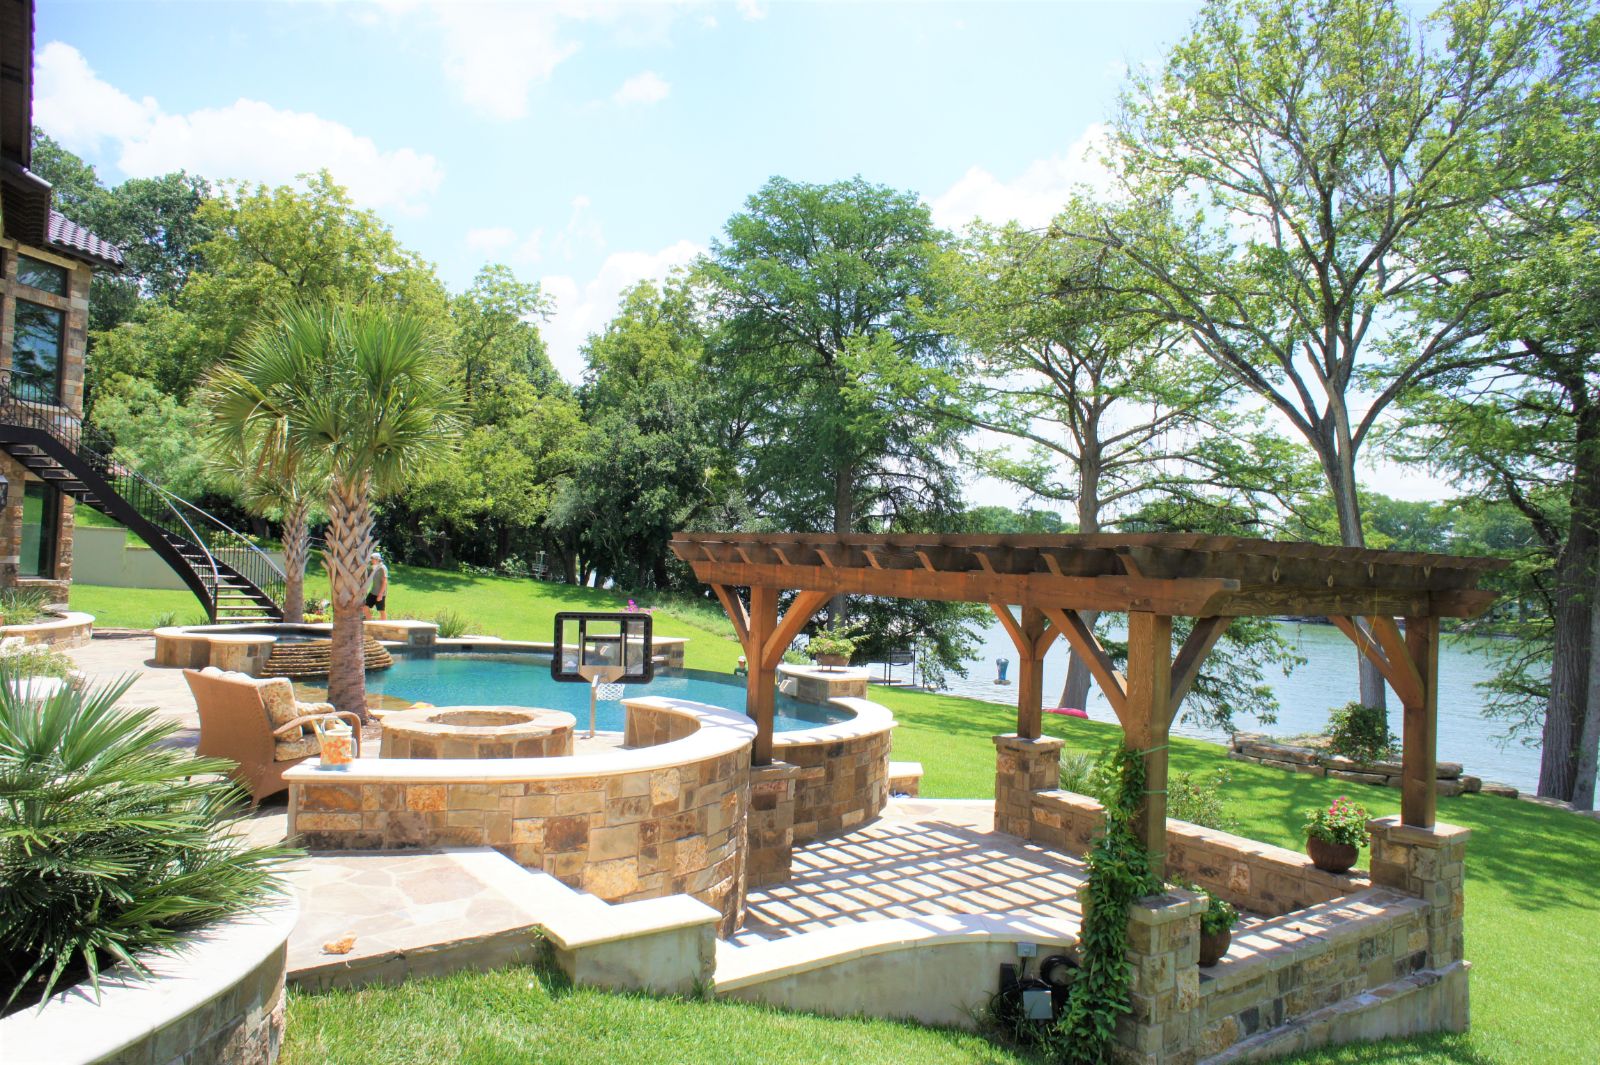 15x19, Pergola, Heavy Timbers, cement or concrete pad, commercial, garden structure, poolside or swimming pool, outdoor living, entertaining, pergola kit, shade structure, builder/contractor, post and beam, wood pergola, free standing pergola